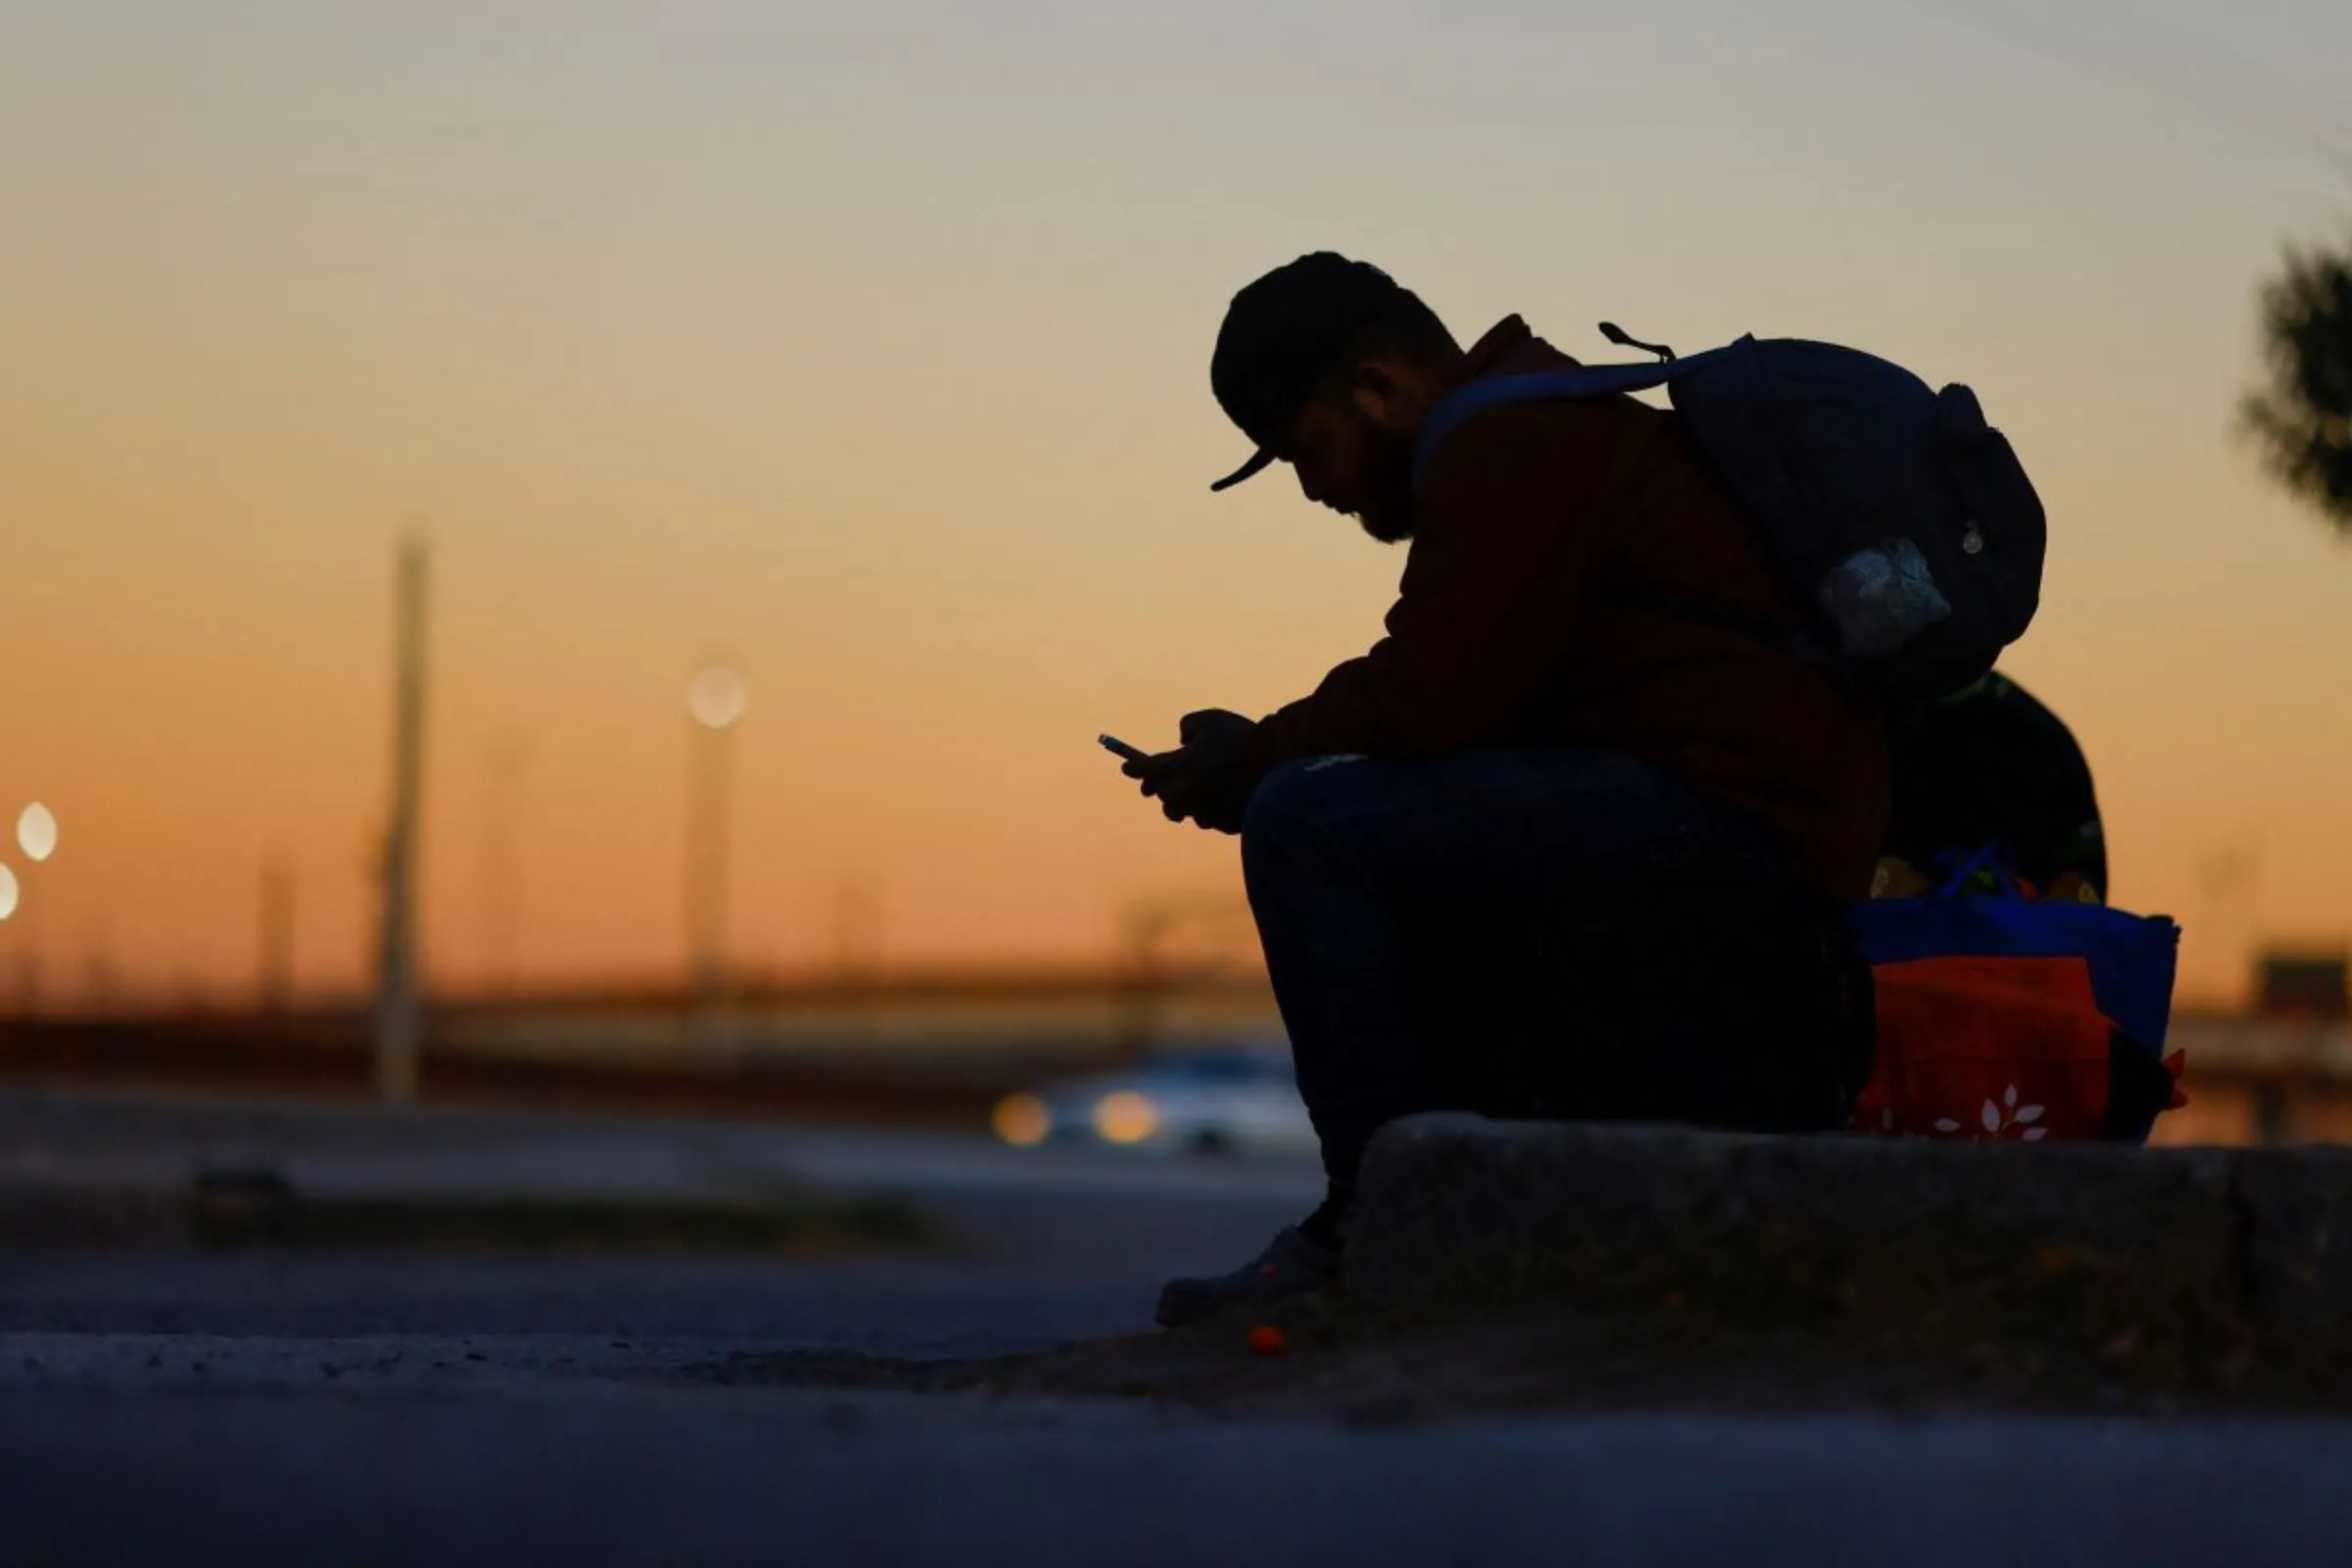 A migrant seeking asylum in the U.S. uses his phone to access the CBP One App in Ciudad Juarez, Mexico January 12, 2023. REUTERS/Jose Luis Gonzalez